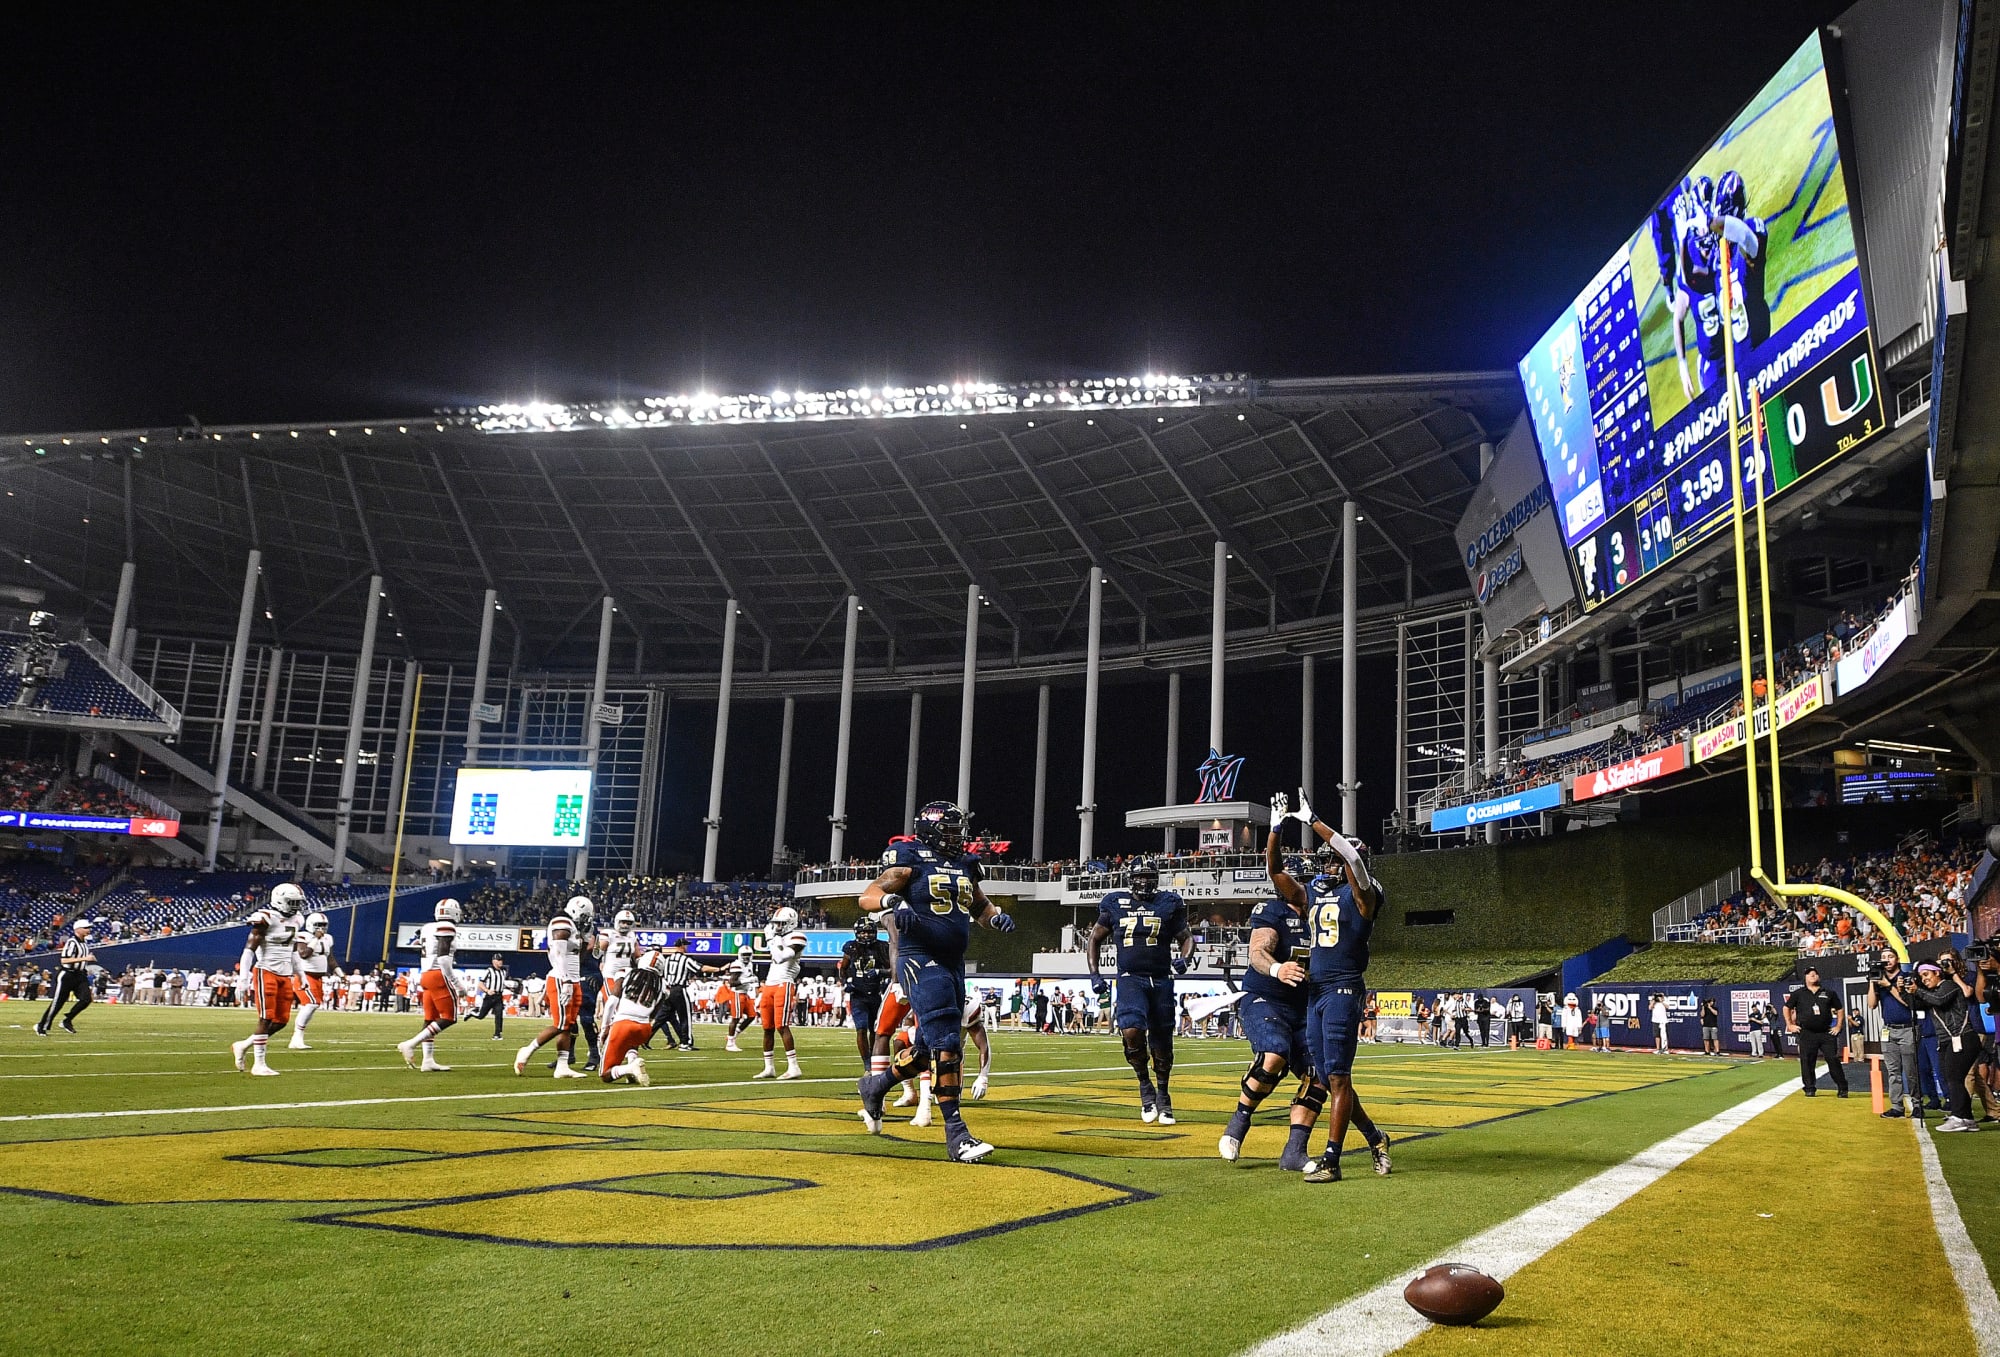 FIU-Miami game at Marlins Park to feel like old times